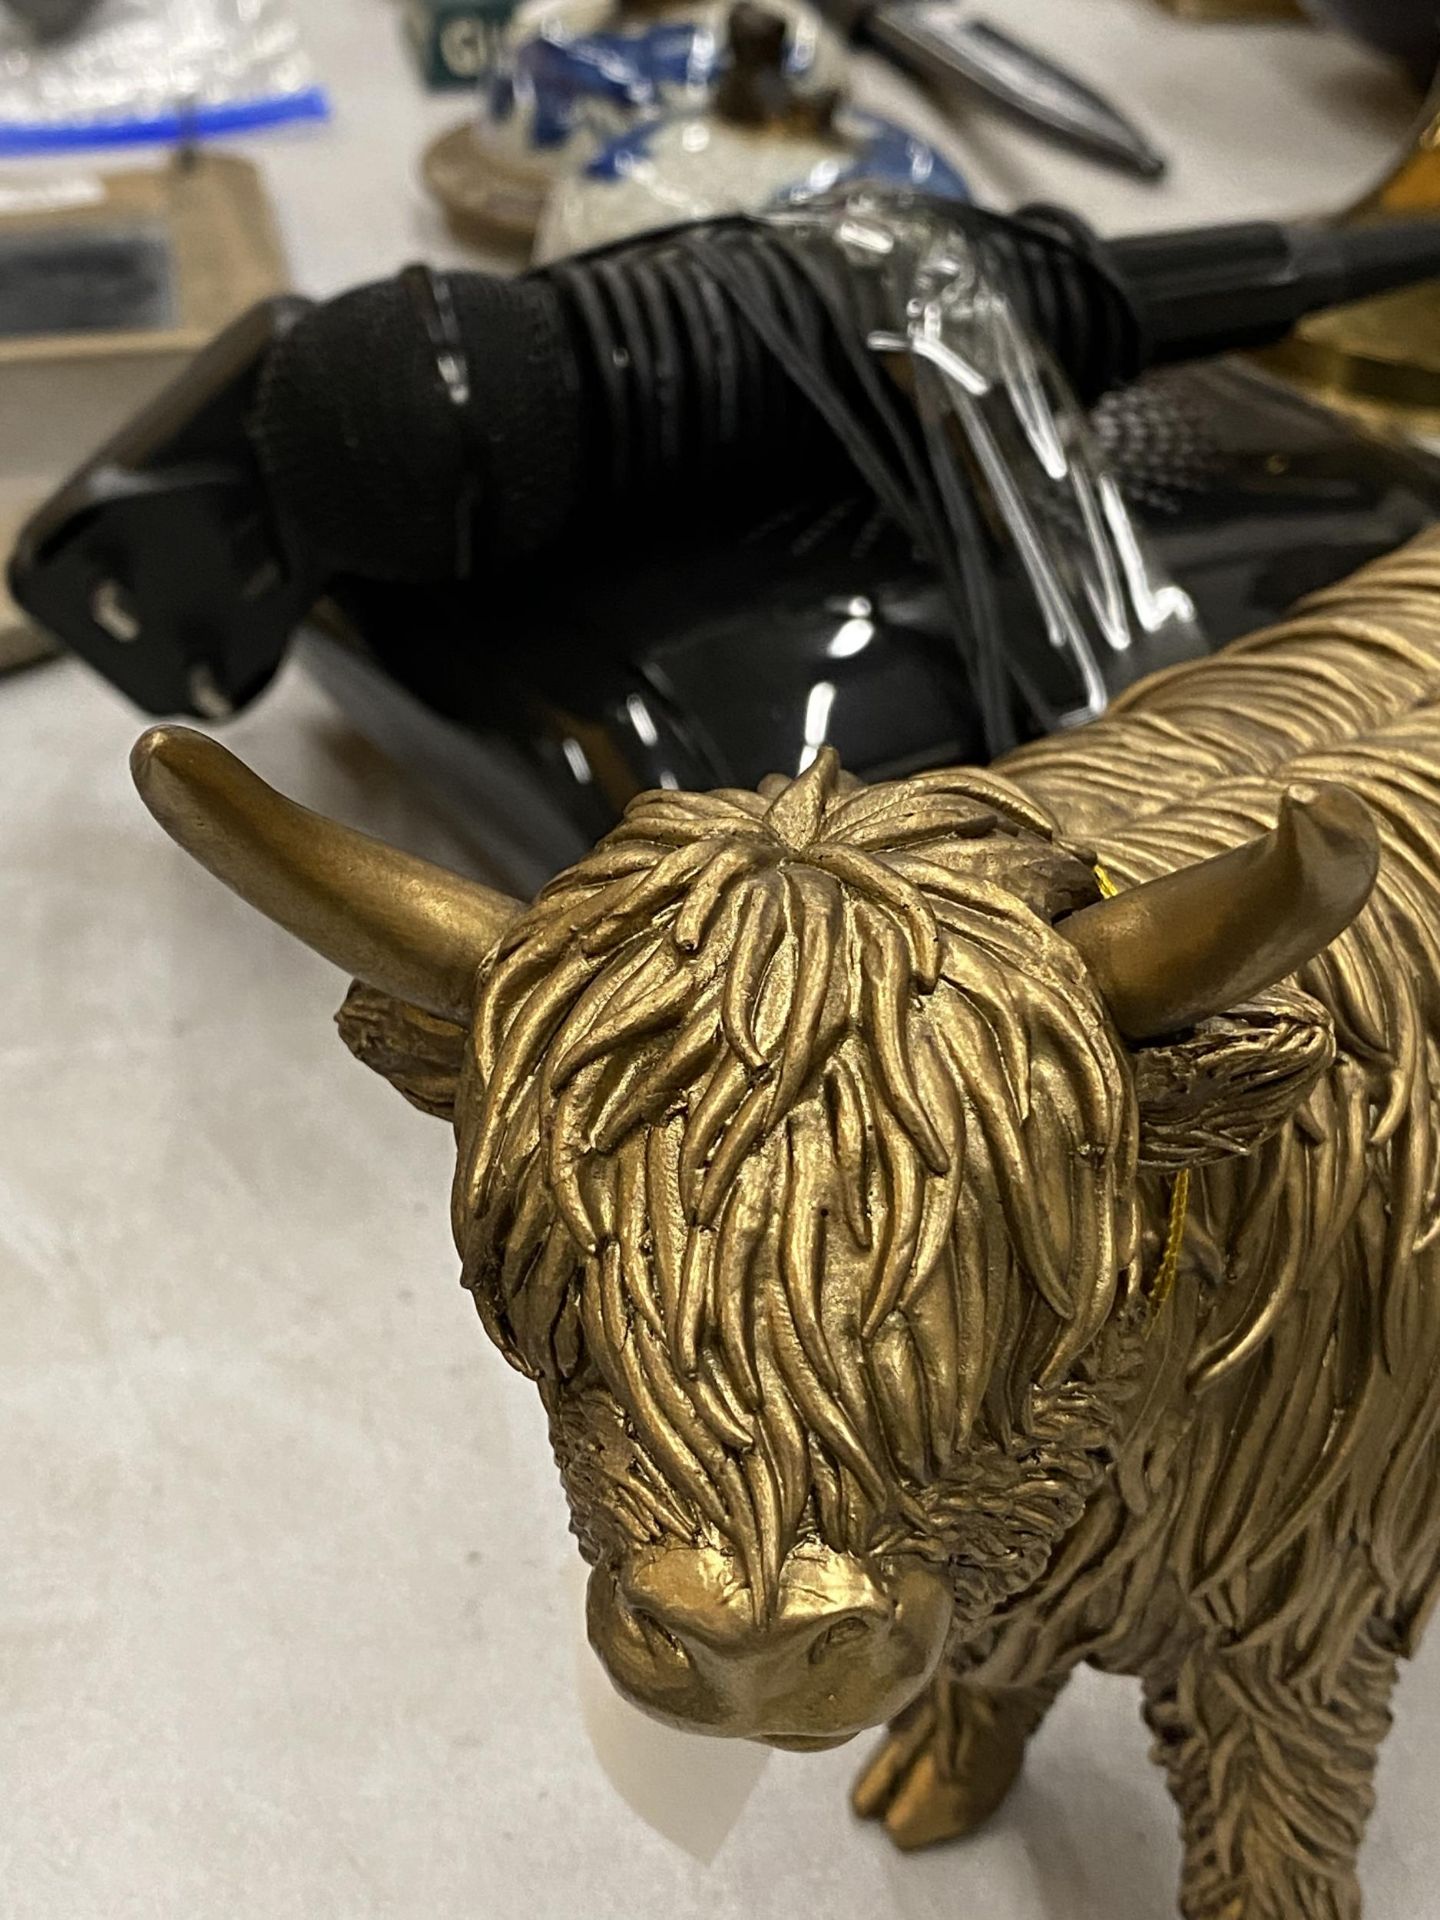 A GOLD COLOURED MODEL OF A HIGHLAND COW BY LEONARDO REFLECTIONS PLUS A BOXED ATLAS EDITIONS - Image 4 of 5